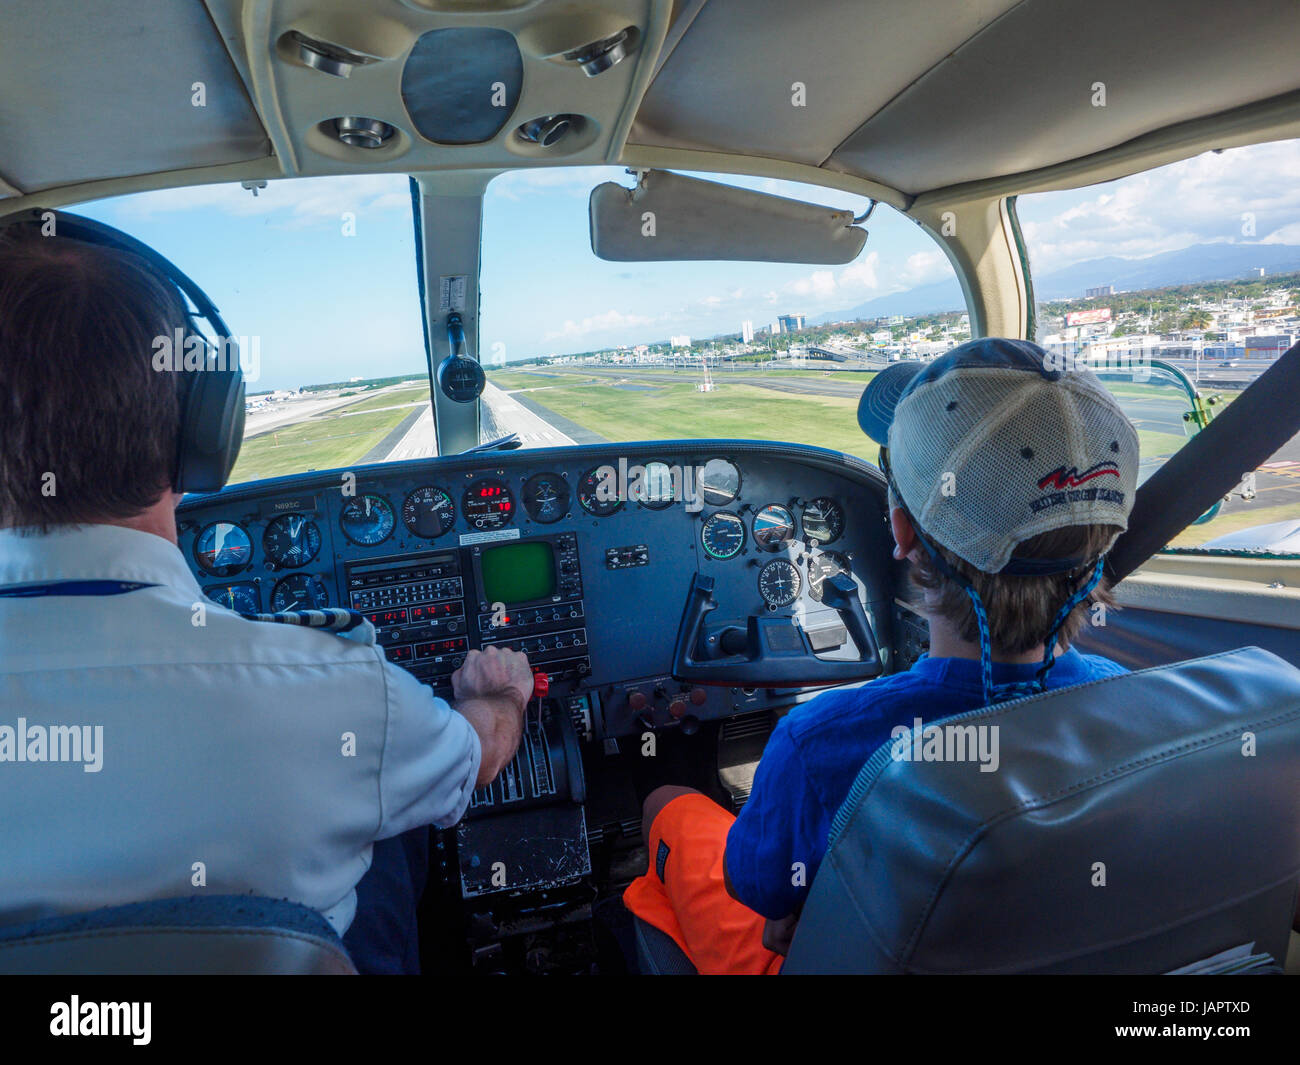 young boy in baseball cap in the co-pilot seat of a small airplane approaching the runway on the british virgin island of tortola Stock Photo